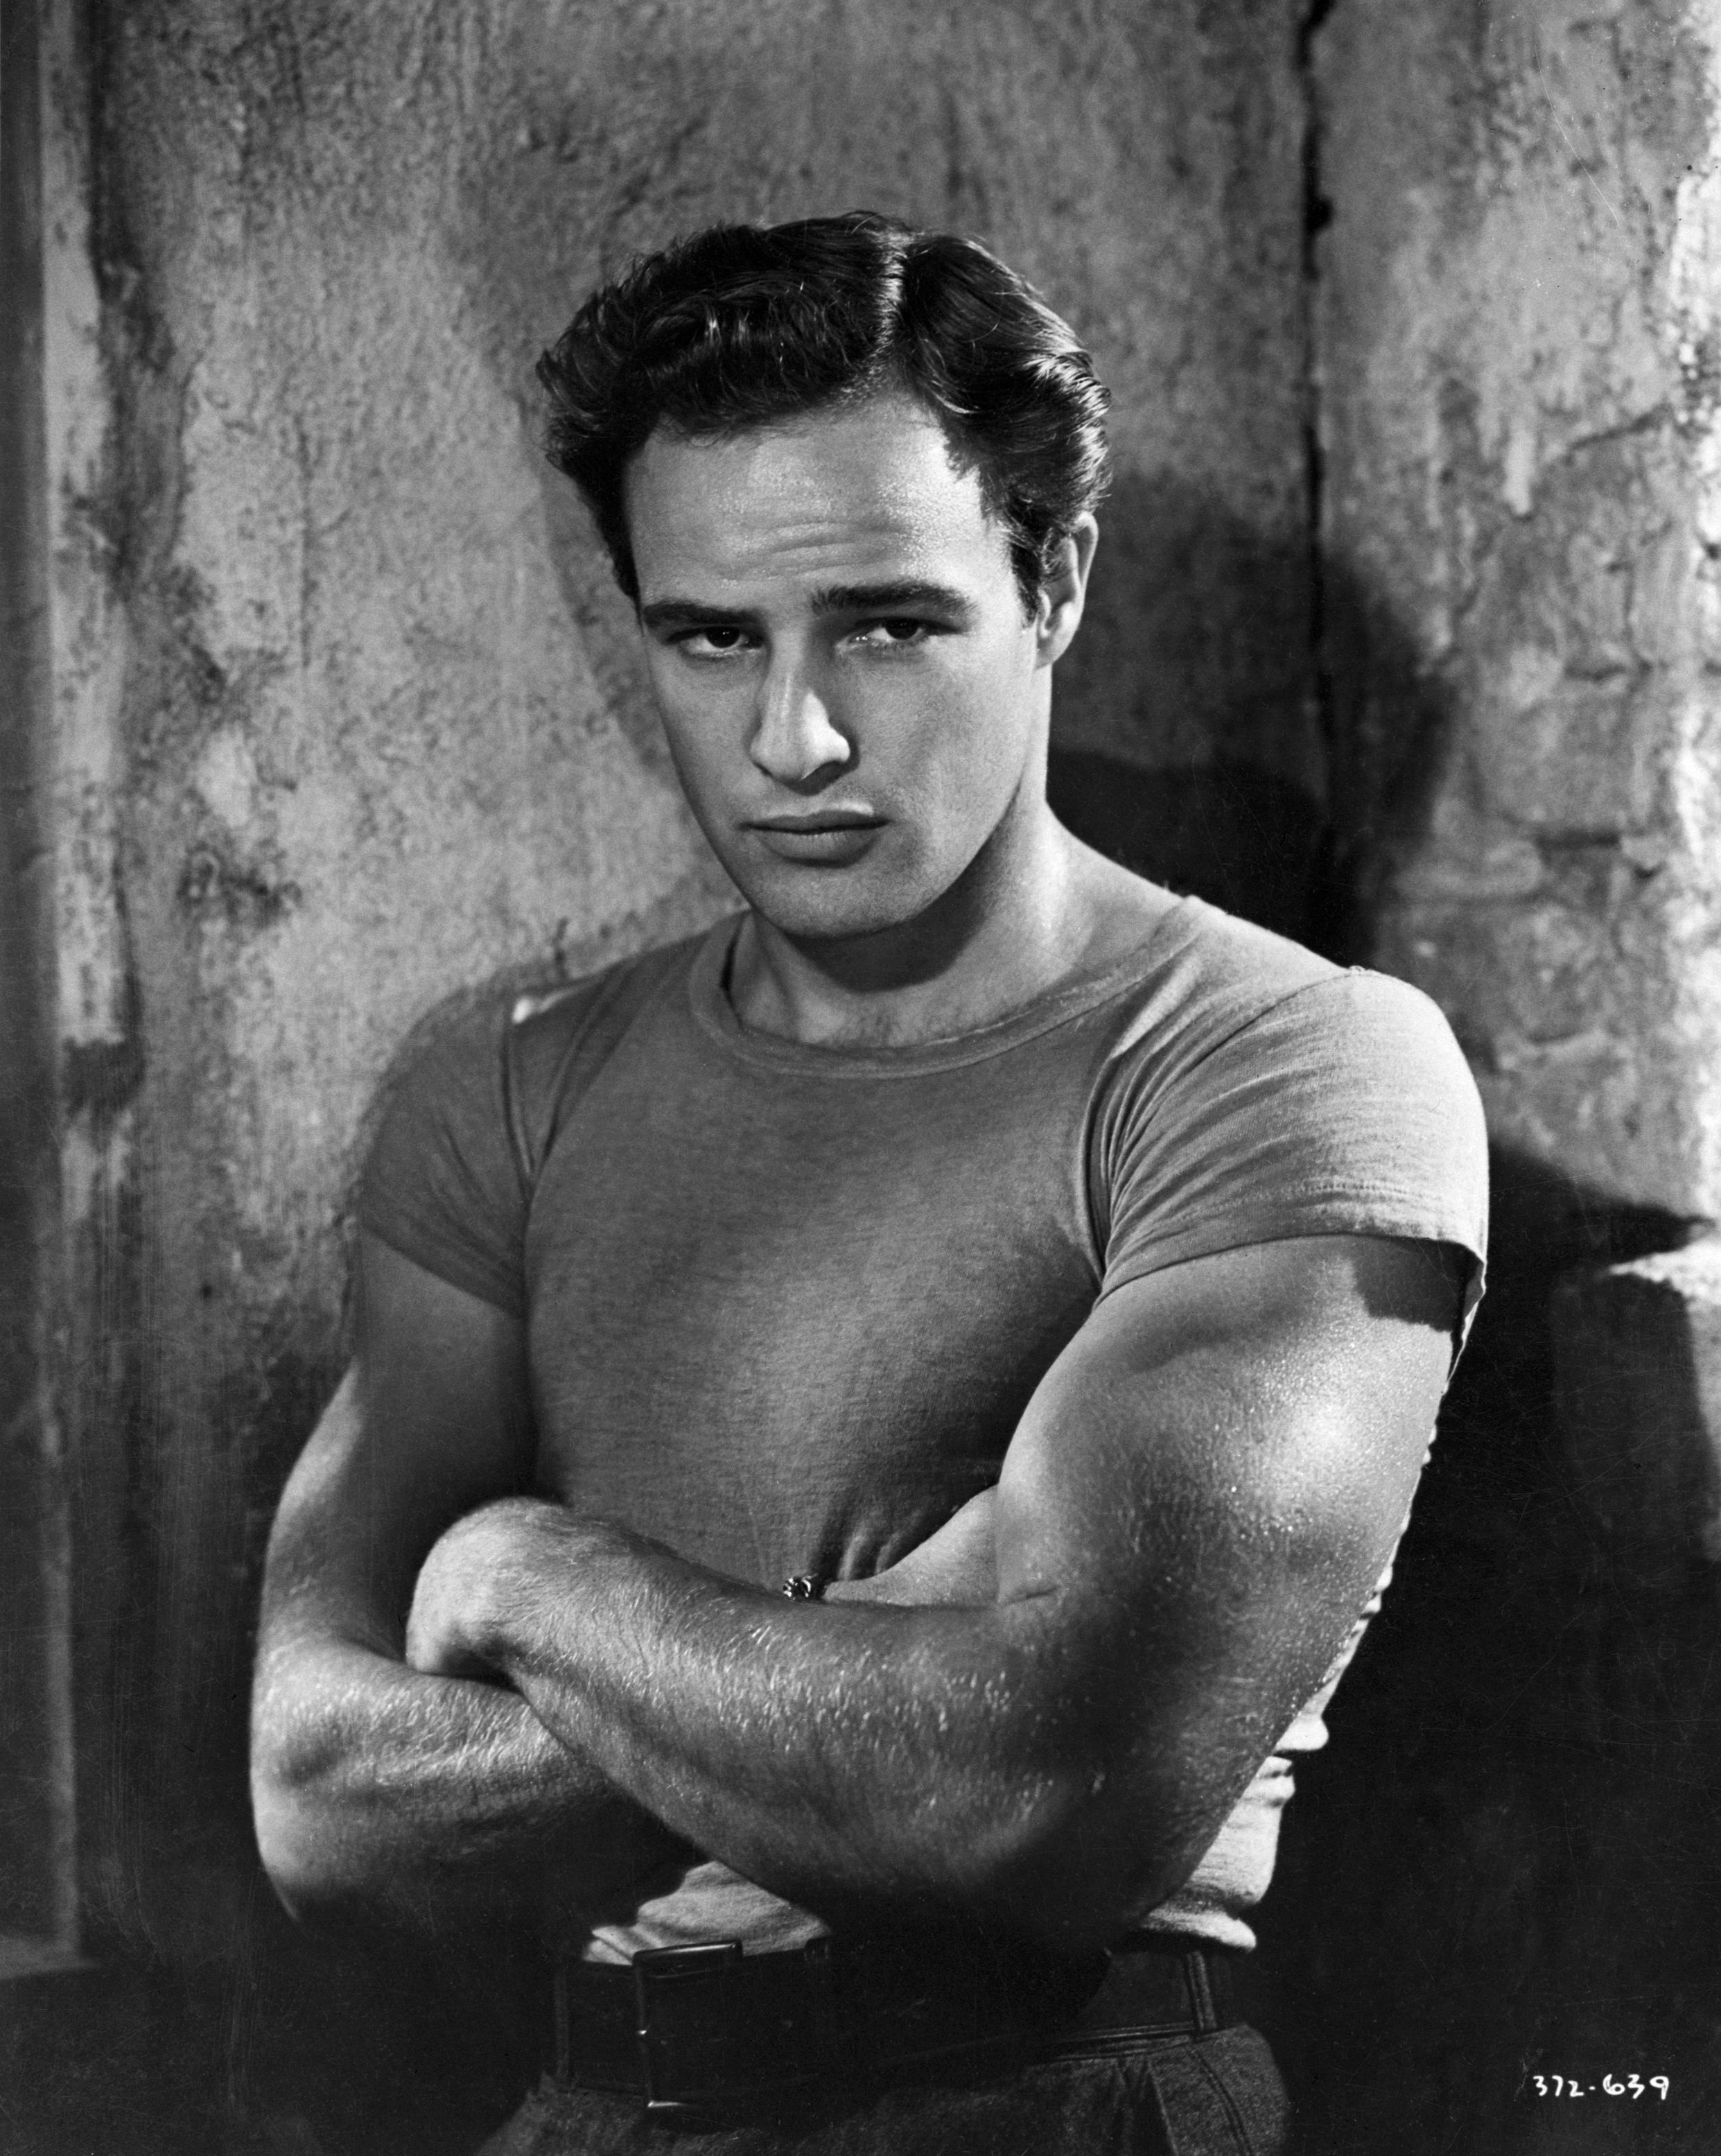 Marlon Brando, in character as Stanley Kowalski from the film "A Streetcar Named Desire" in 1952 | Source: Getty Images